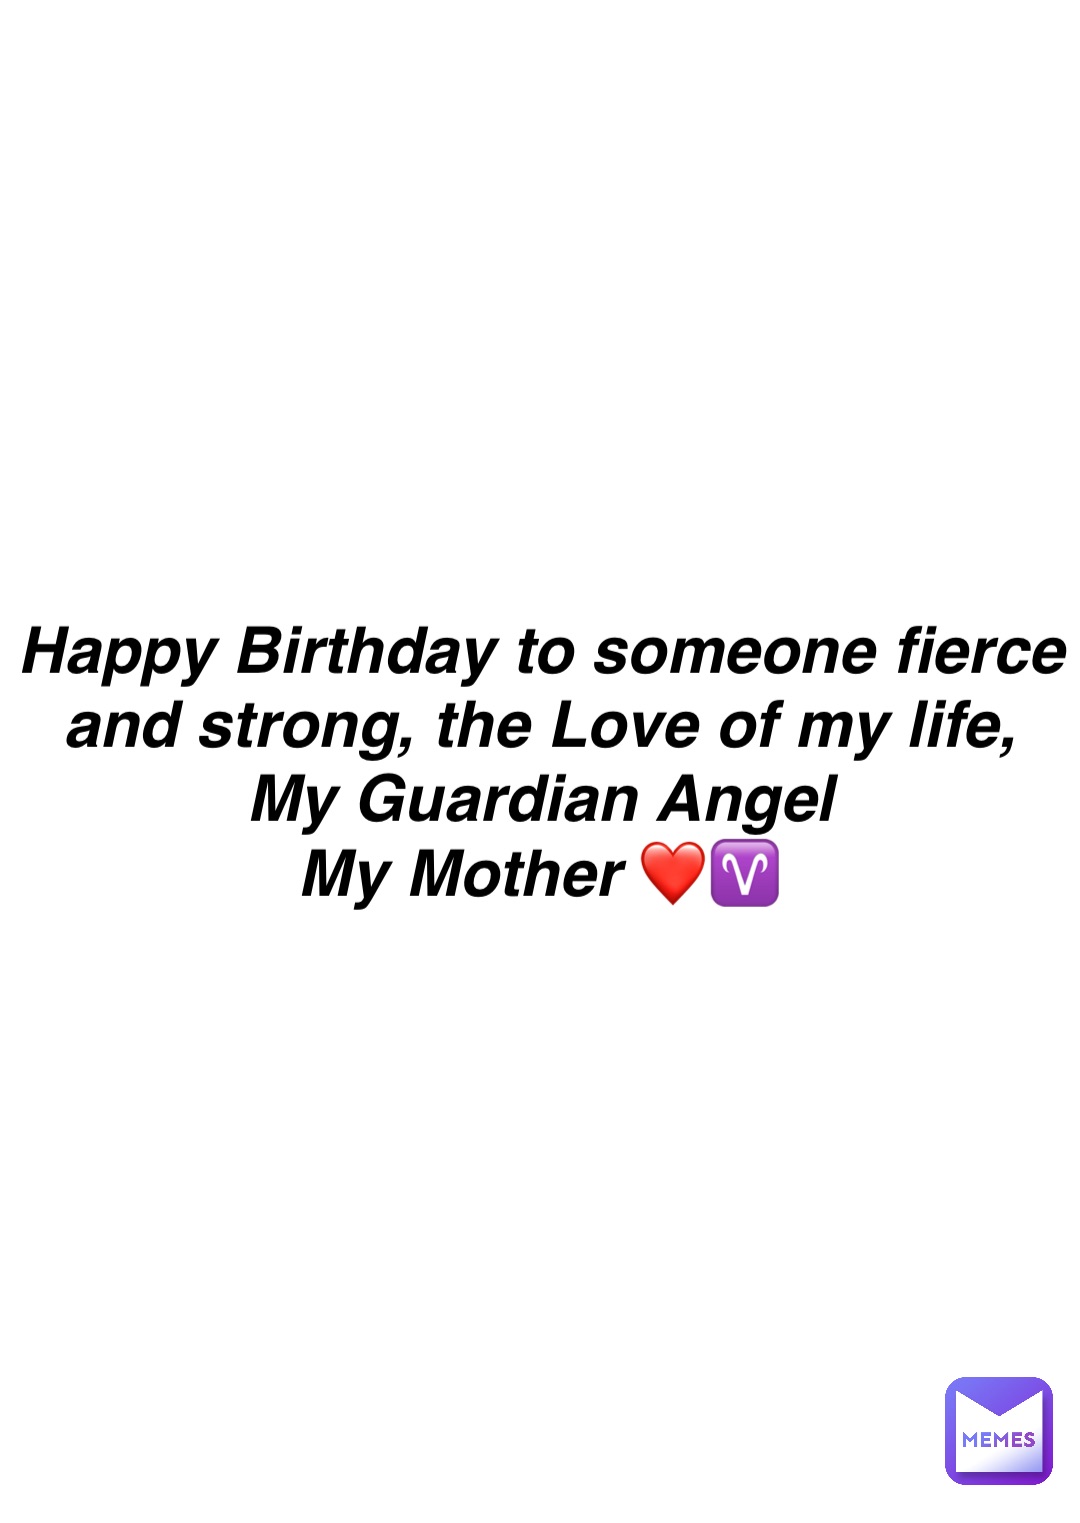 Double tap to edit Happy Birthday to someone fierce and strong, the Love of my life,
My Guardian Angel
My Mother ❤️♈️